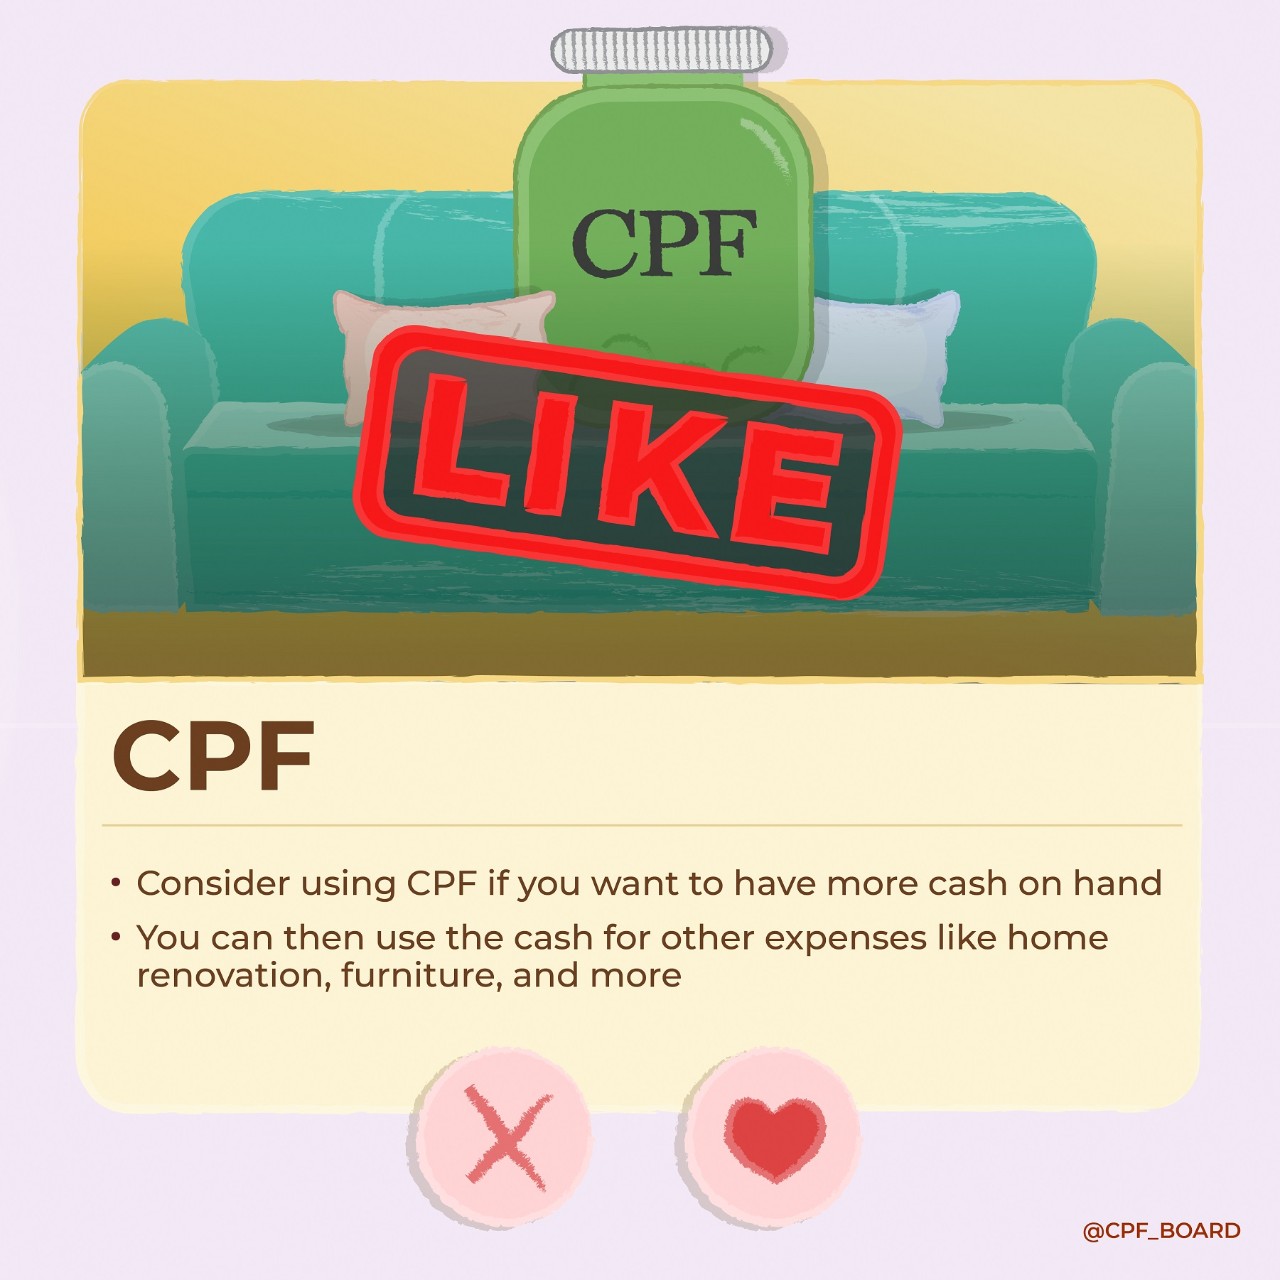 Consider using CPF if you want to have more cash on hand